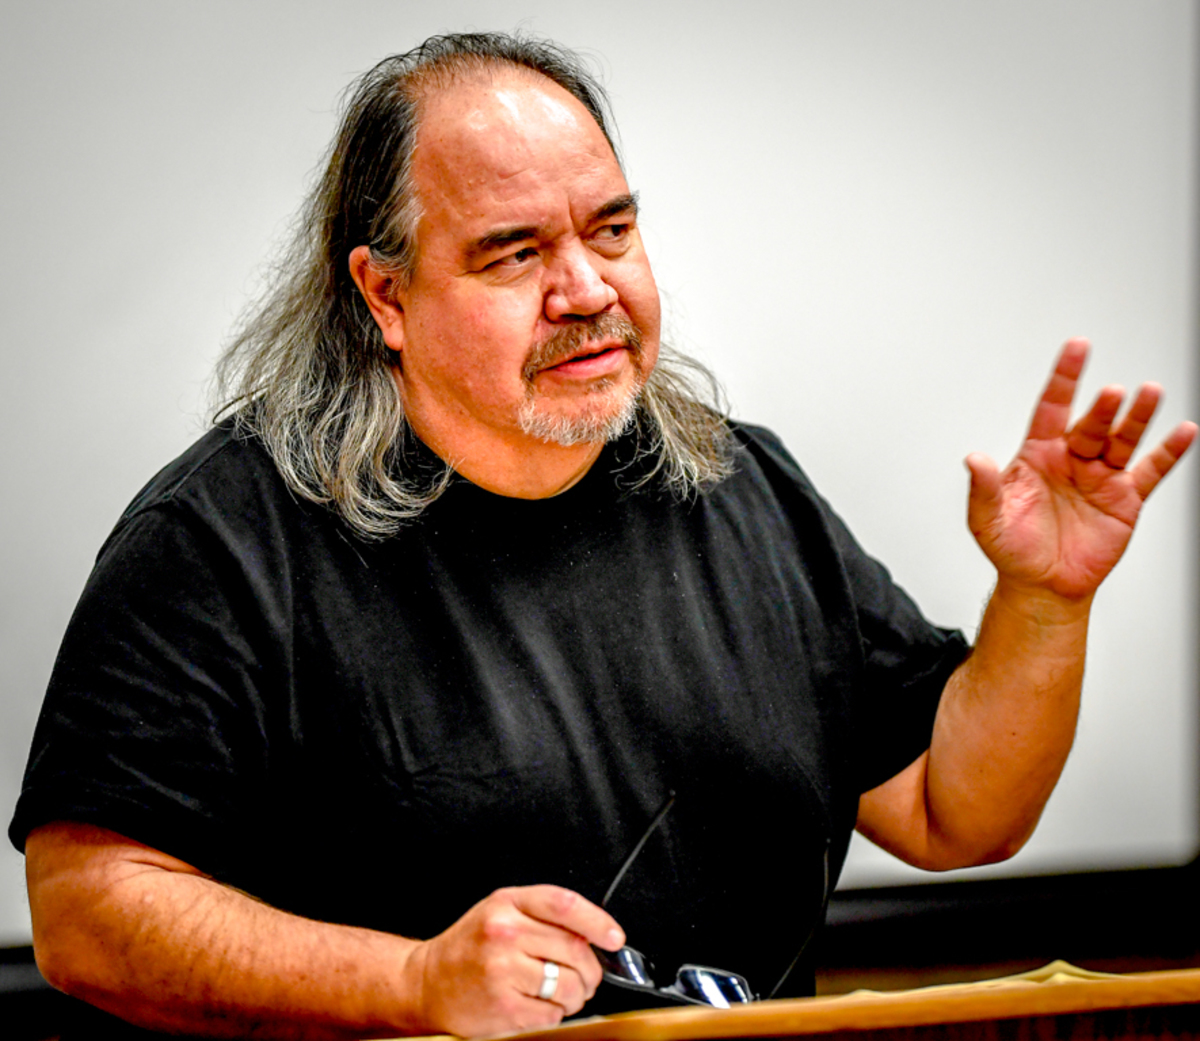 Mark Turcotte reads his poetry in a very compelling musical and rhythmic manner. The audience was captivated by his poetry which reflected his native American up bringing.